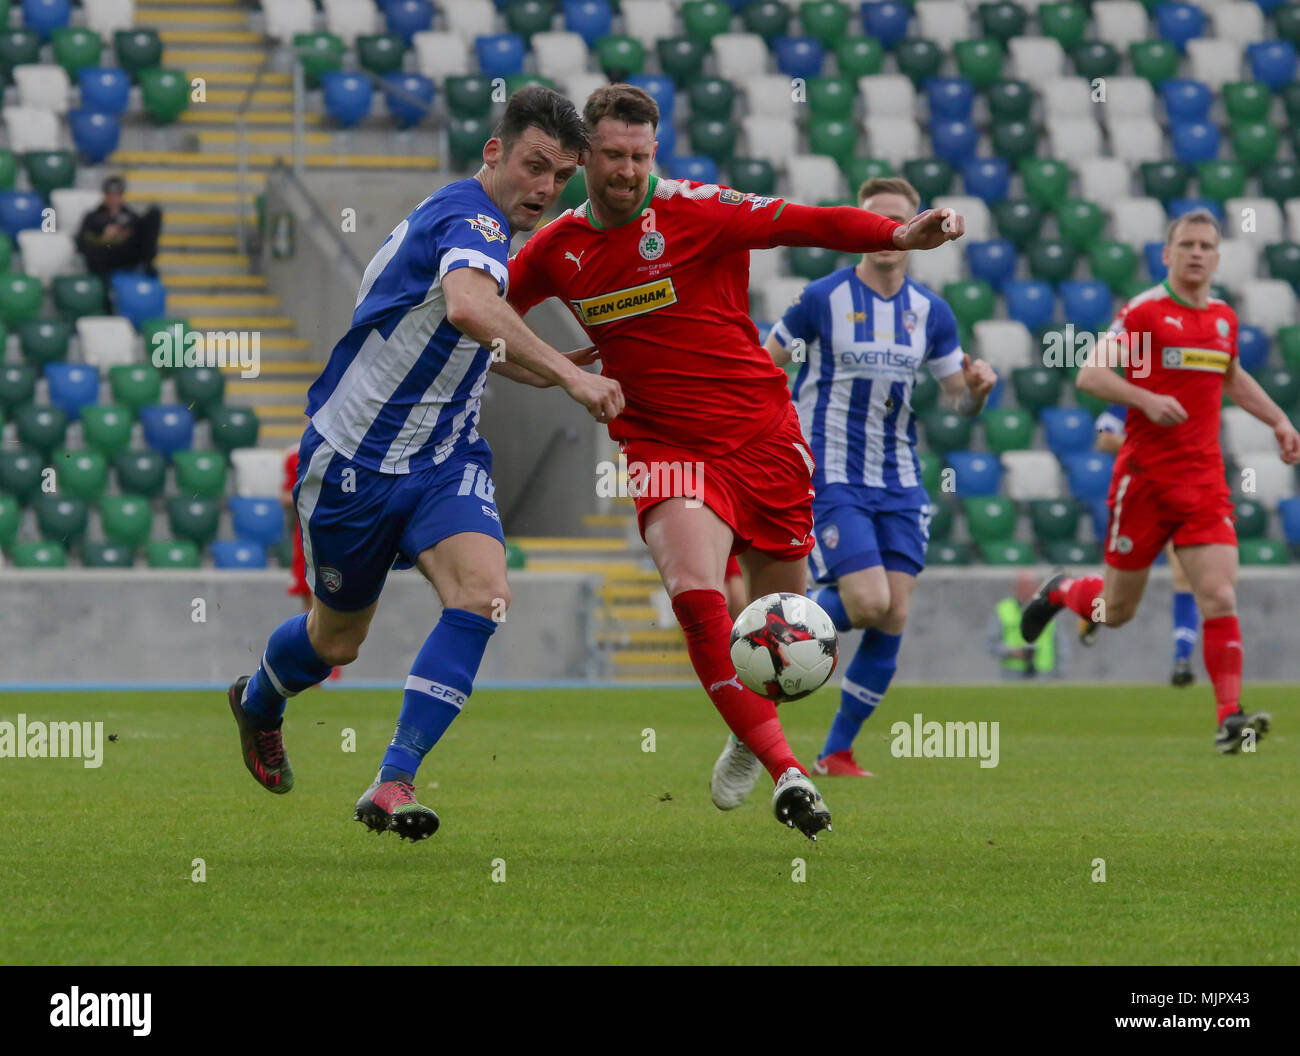 Belfast, Northern Ireland, UK, 5 May 2018. National Football Stadium at Windsor Park, Belfast, Northern Ireland. 05 May 2018. Tennent's Irish Cup Final - Cliftonville 1 Coleraine 3. Coleraine's Eoin Bradley (left) and Cliftonville's Garry Breen battle for the ball. Credit: David Hunter/Alamy Live News. Stock Photo